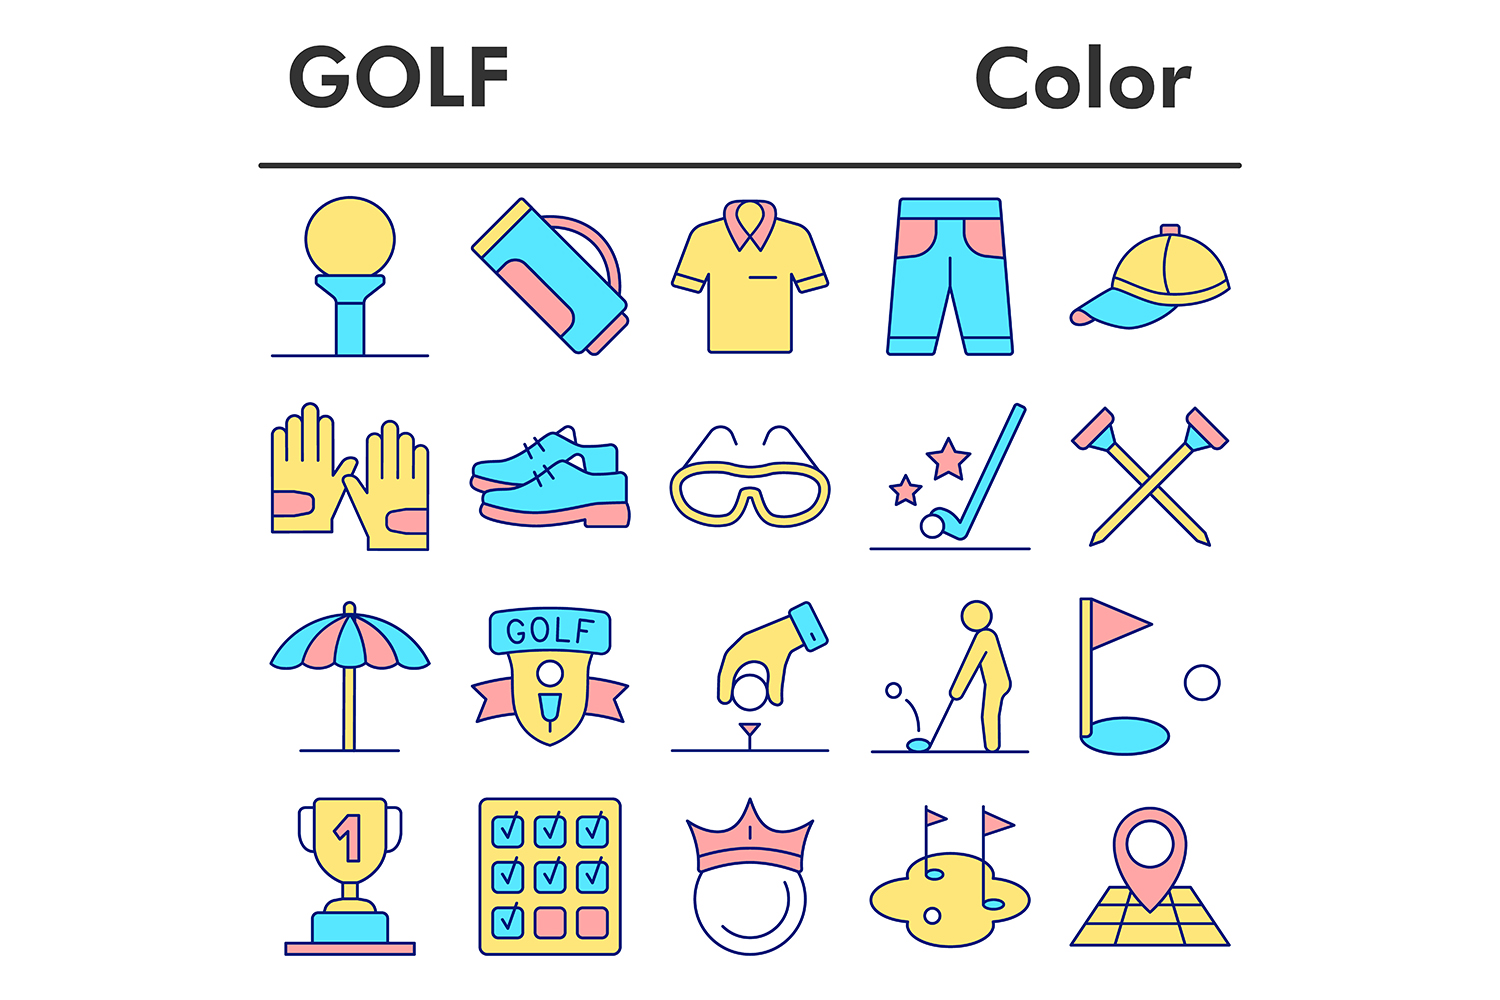 Golf icons set, color style pinterest preview image.